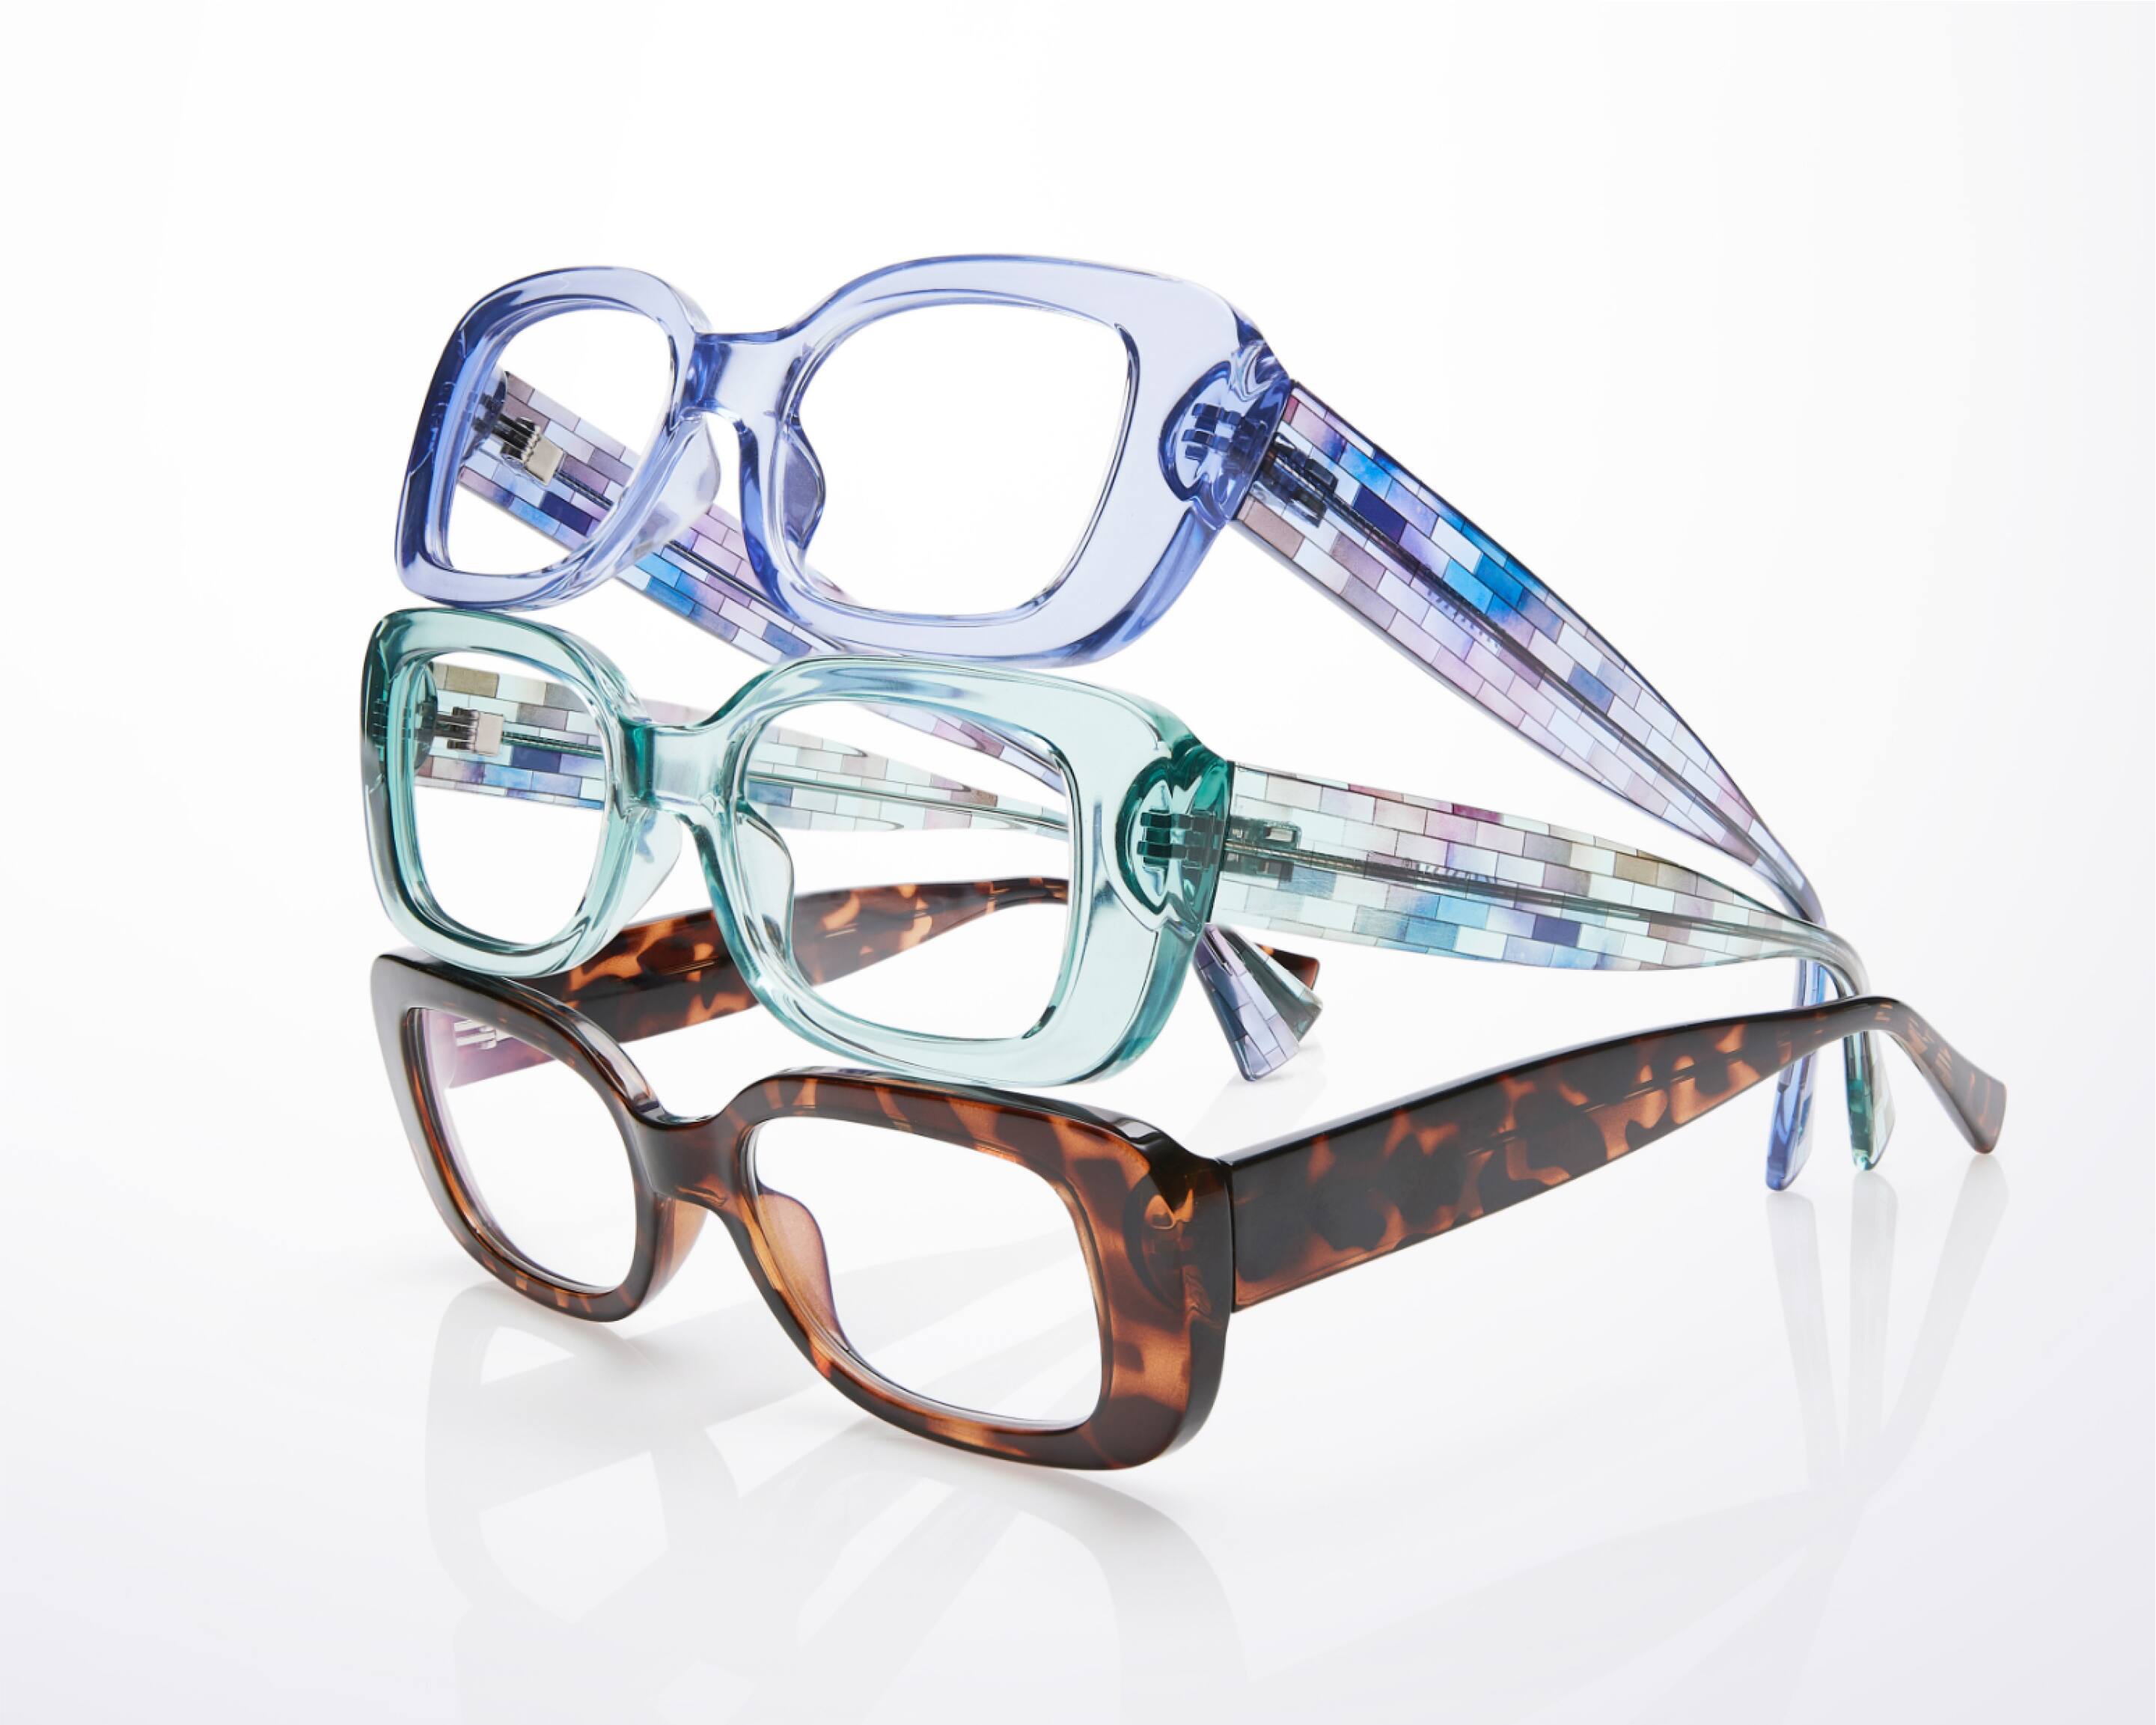 A stack of three rectangle glasses from bottom to top: tortoiseshell, clear green, clear blue.